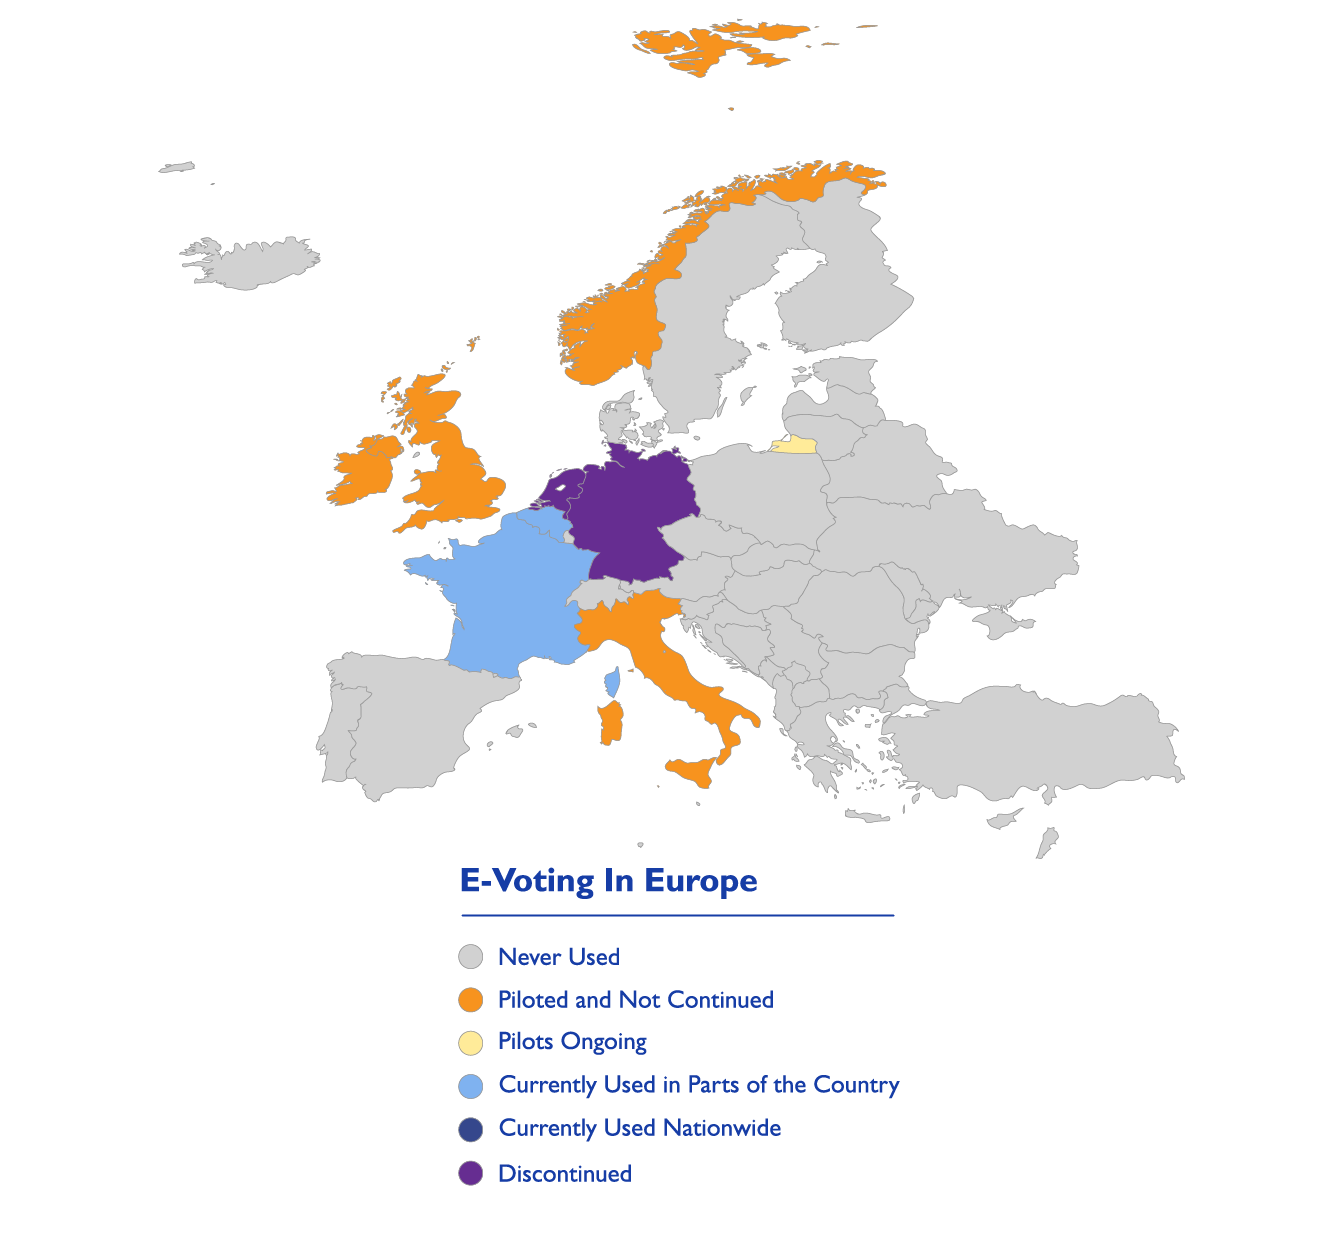 Europe E-Voting Map